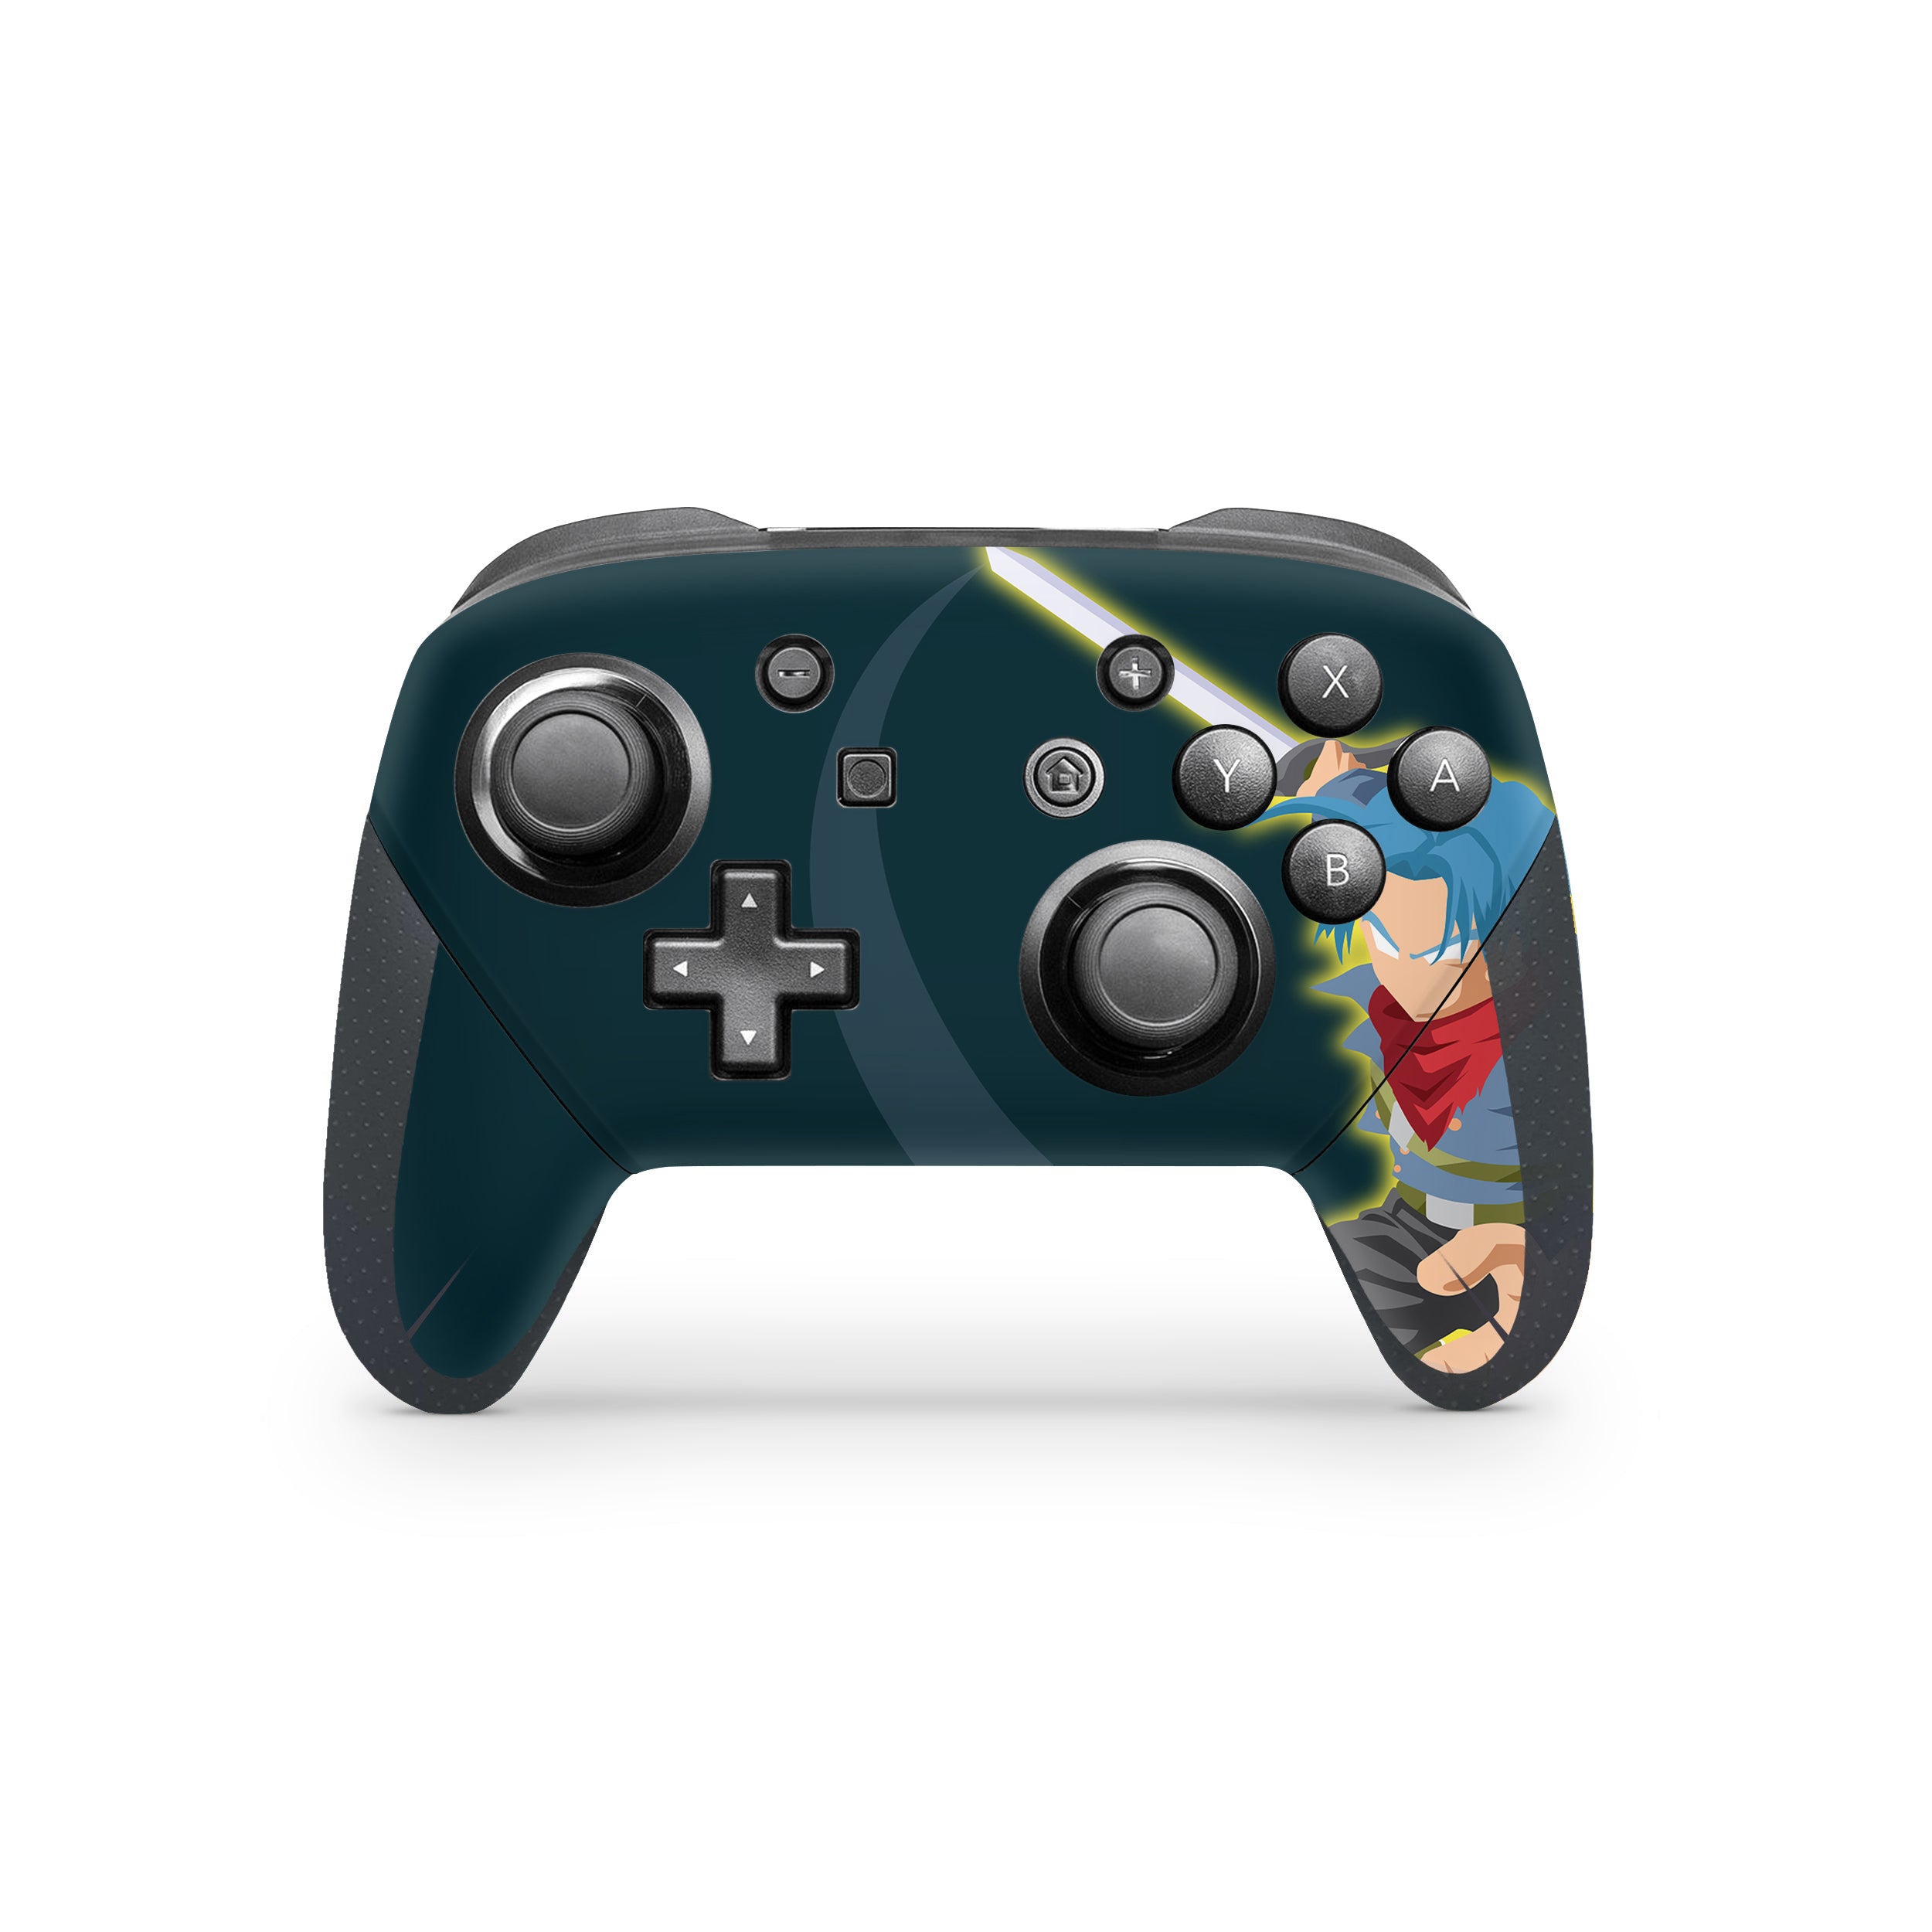 A video game skin featuring a Dragon Ball Super Trunks design for the Switch Pro Controller.